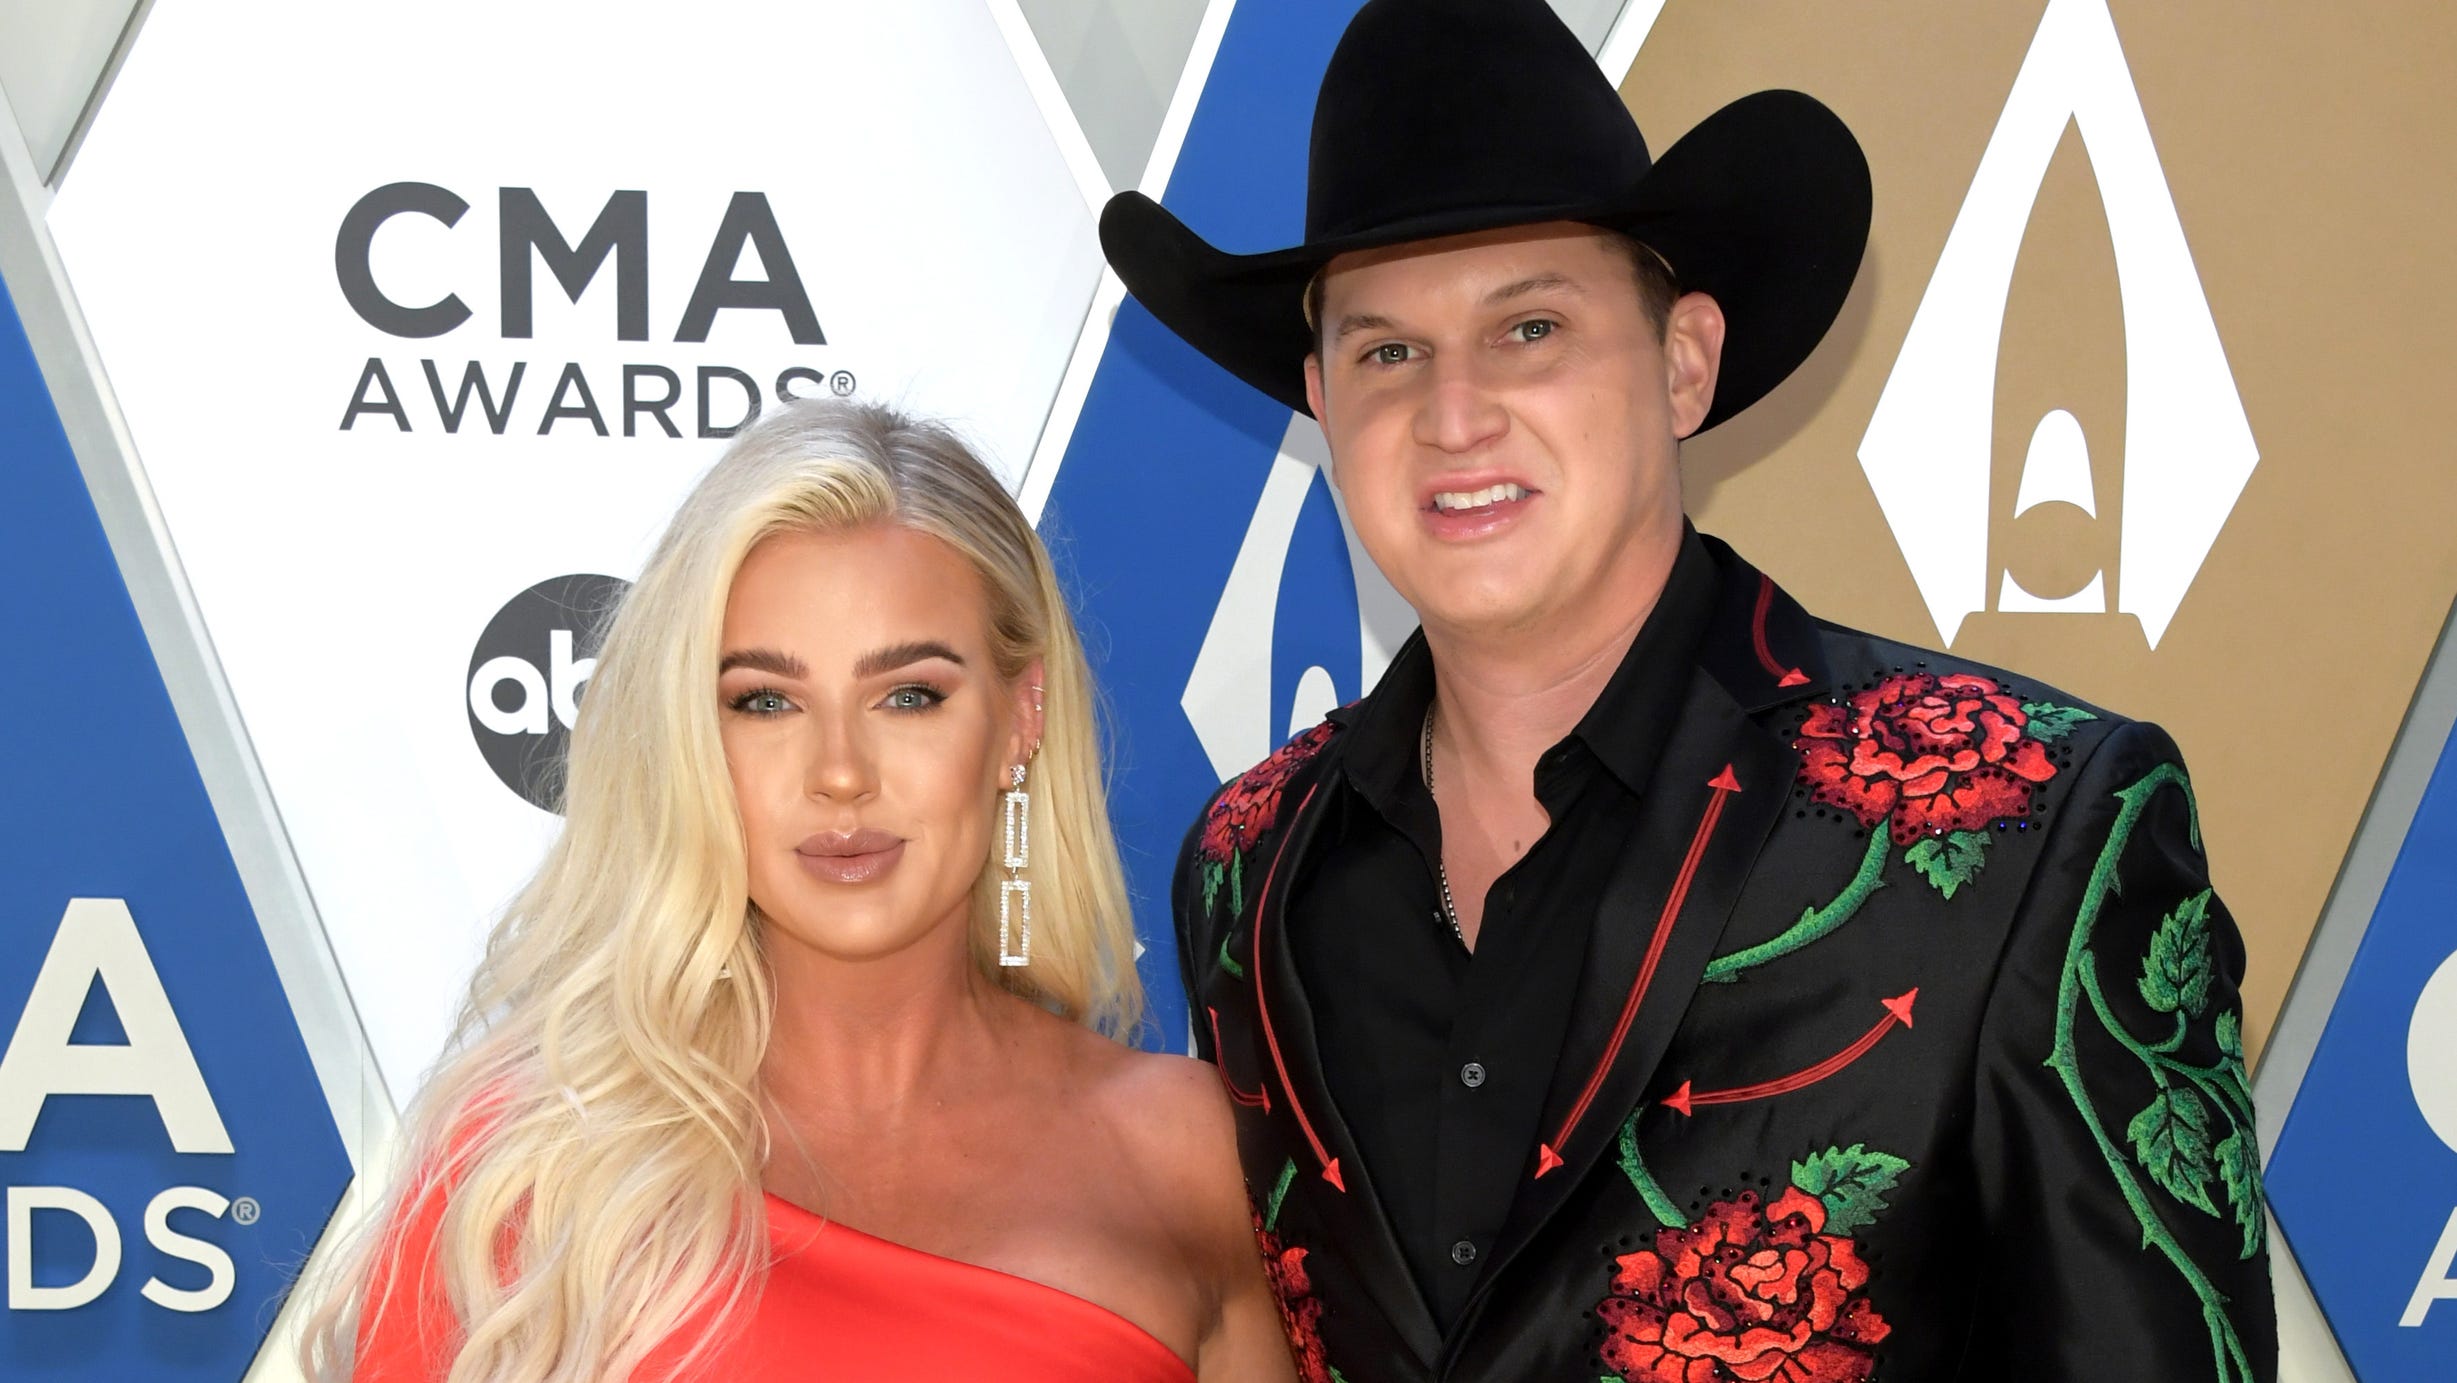 Jon Pardi marries Summer Duncan in intimate Tennessee wedding after COVID-19 canceled May dream wedding - USA TODAY